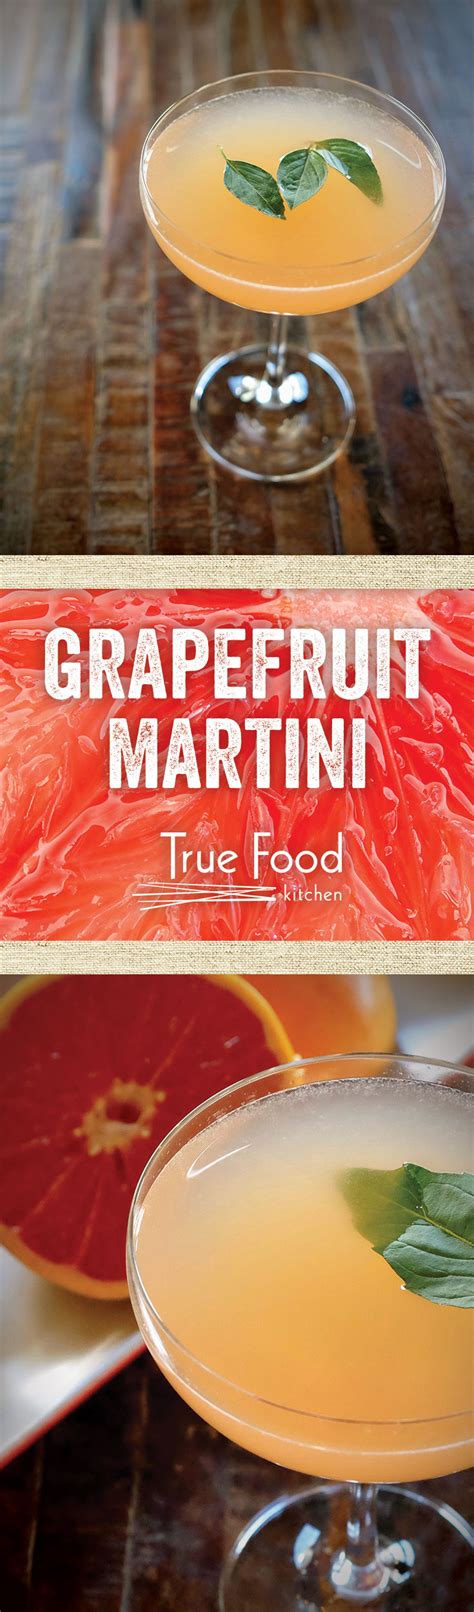 Pasadena is best known for its idyllic suburban neighborhoods and annual rose parade than for its culinary offerings, but scratch beneath the chain restaurants to find plenty of gustatory breadth and depth. The happiest of happy hours. Our Thai Grapefruit Martini ...